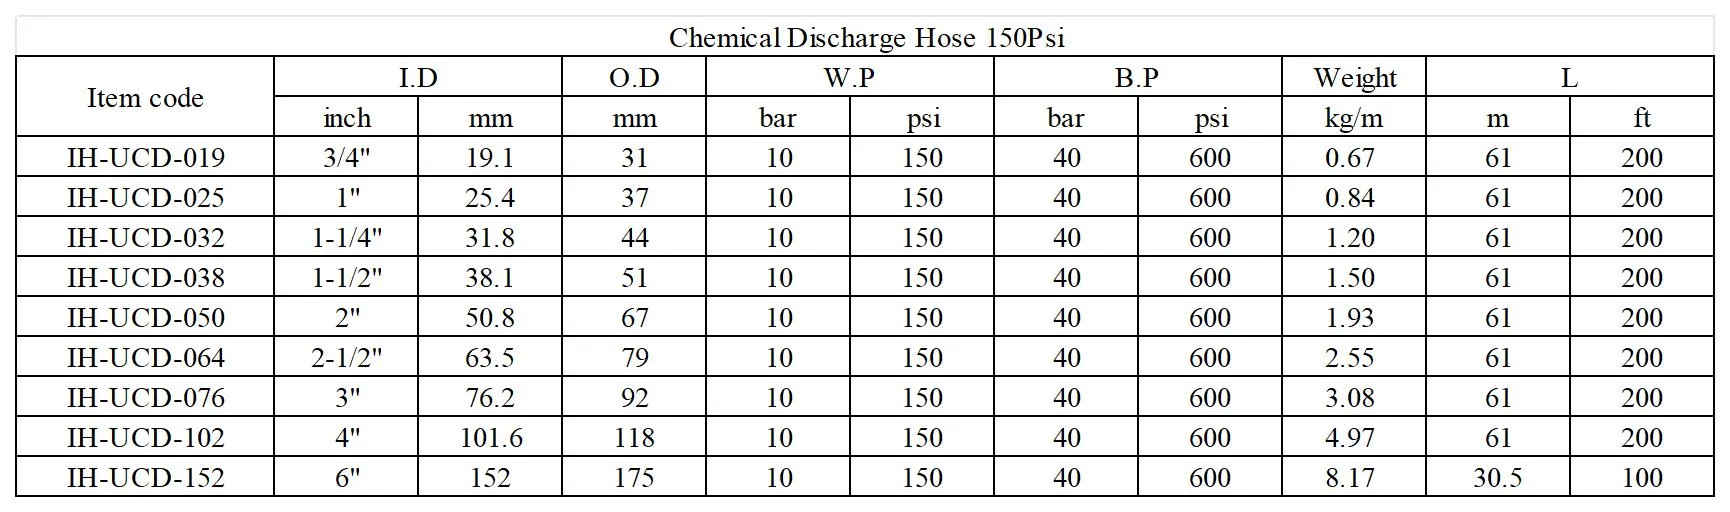 UHMWPE Chemical Discharge Hose_150psi